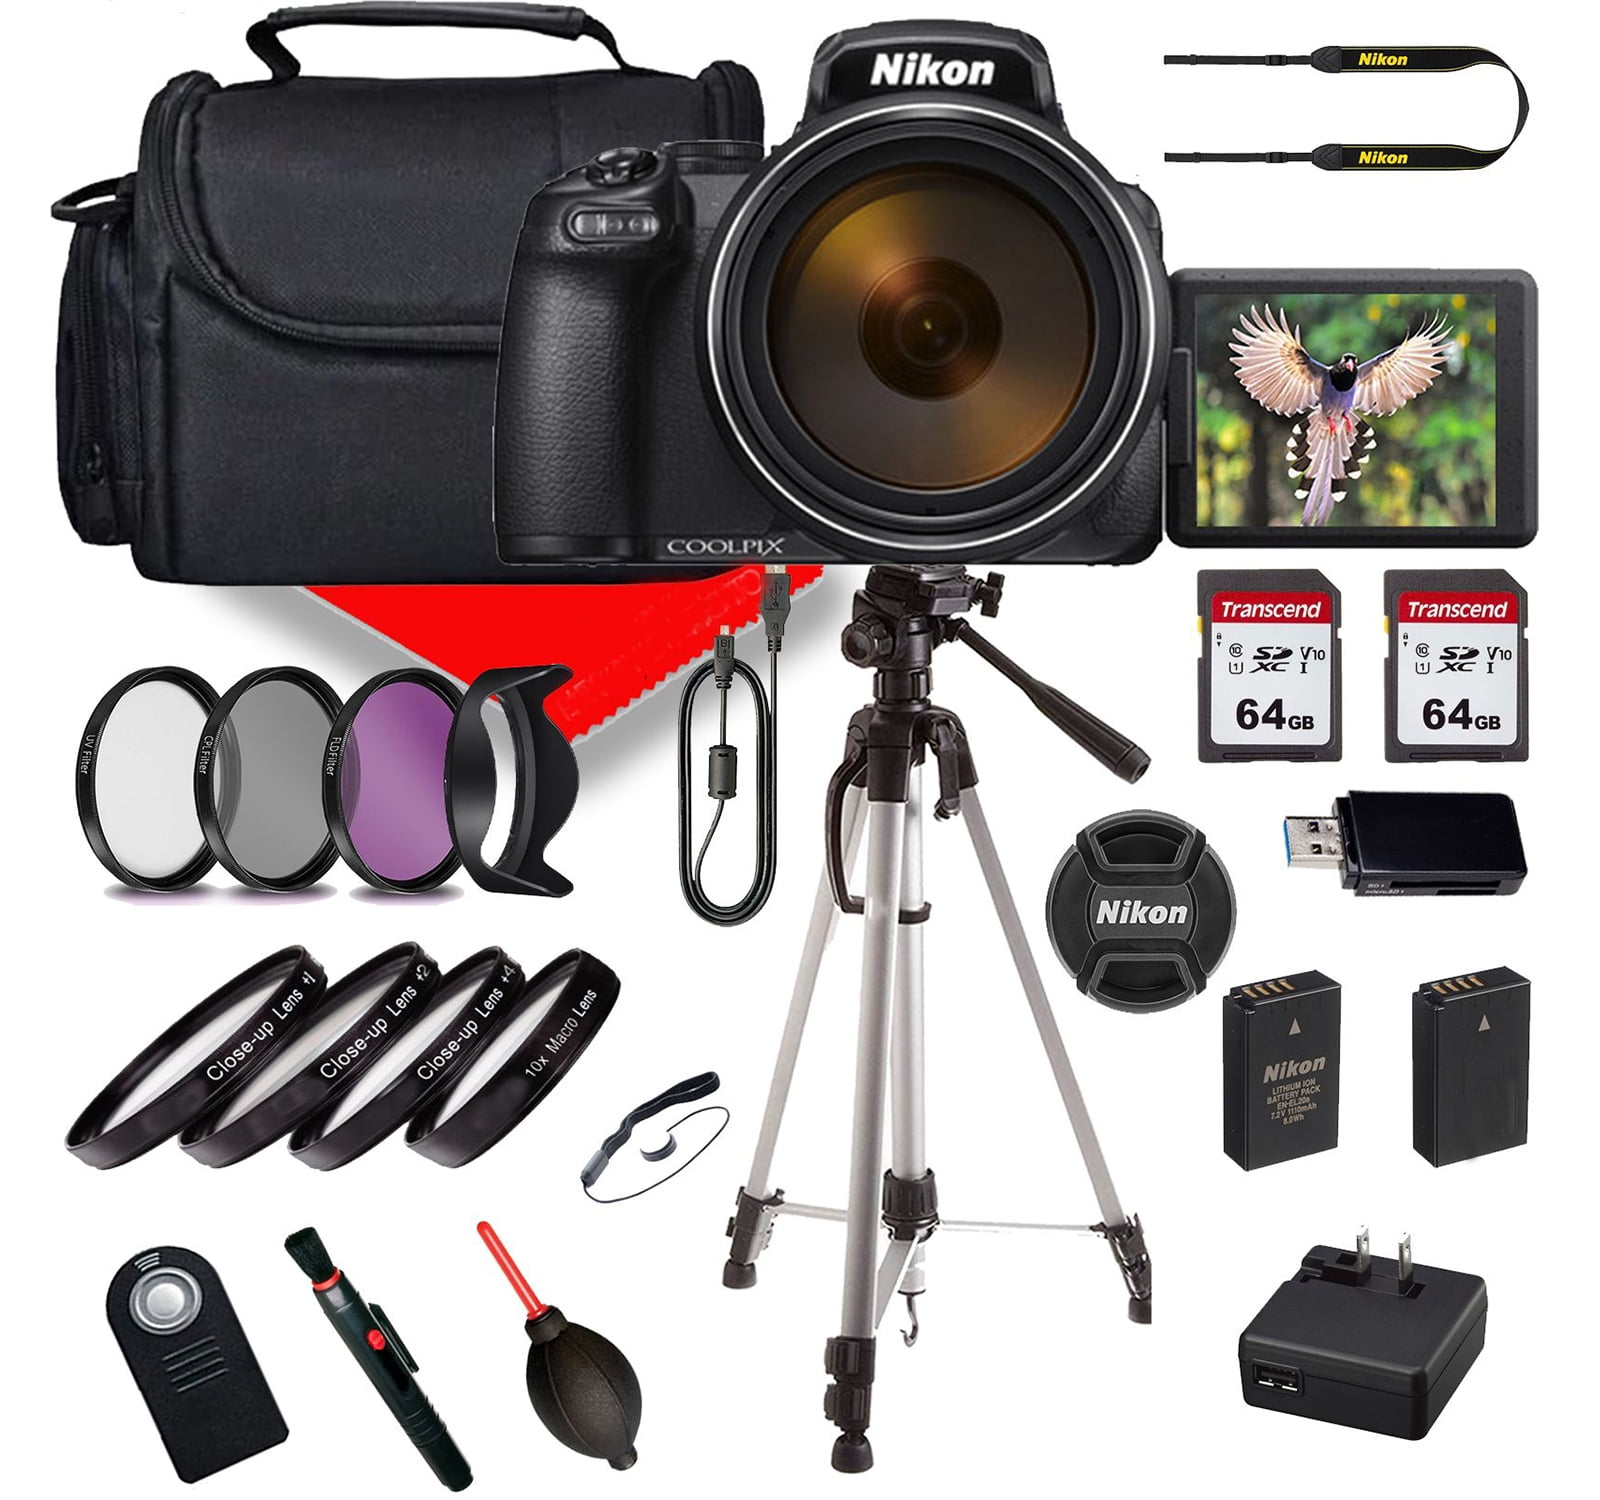 Nikon COOLPIX P1000 Digital Point & Shoot Camera - Bundle with Camera Case,  128GB SDHC U3 Card, 77mm Filter Kit, Spare Battery, Tripod, Remote Shutter